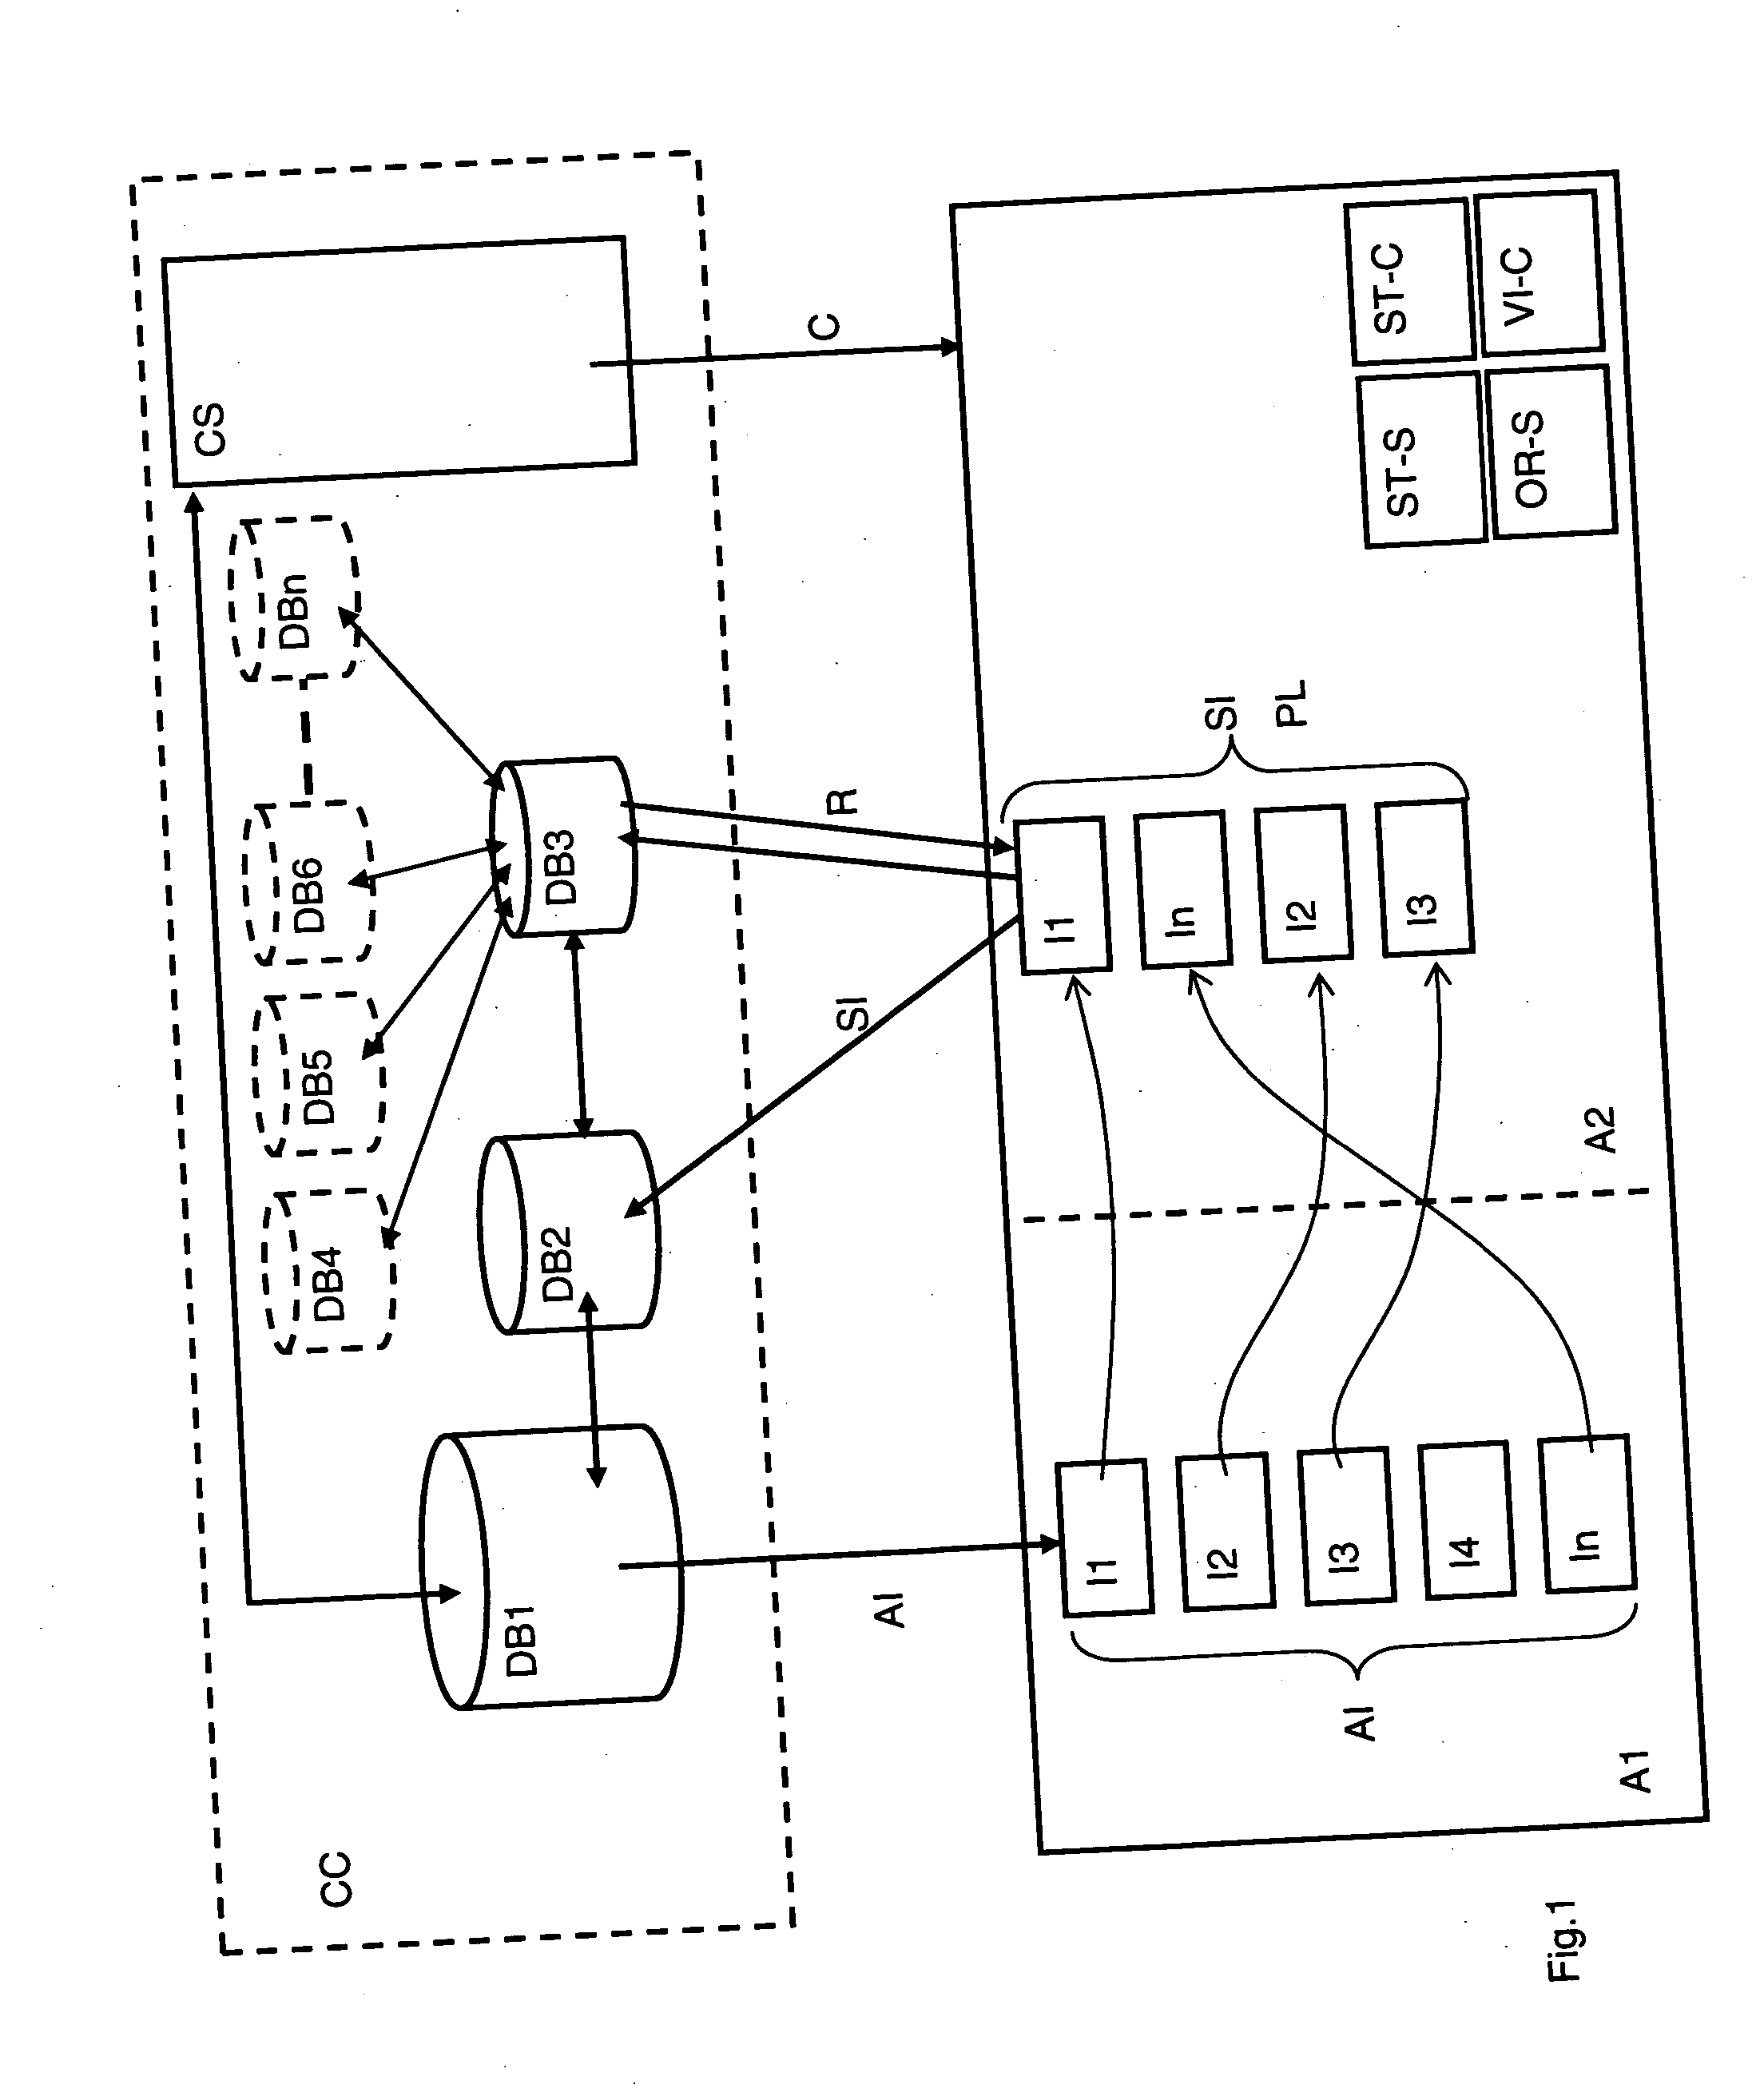 Method and system for dynamically organizing audio-visual items stored in a central database